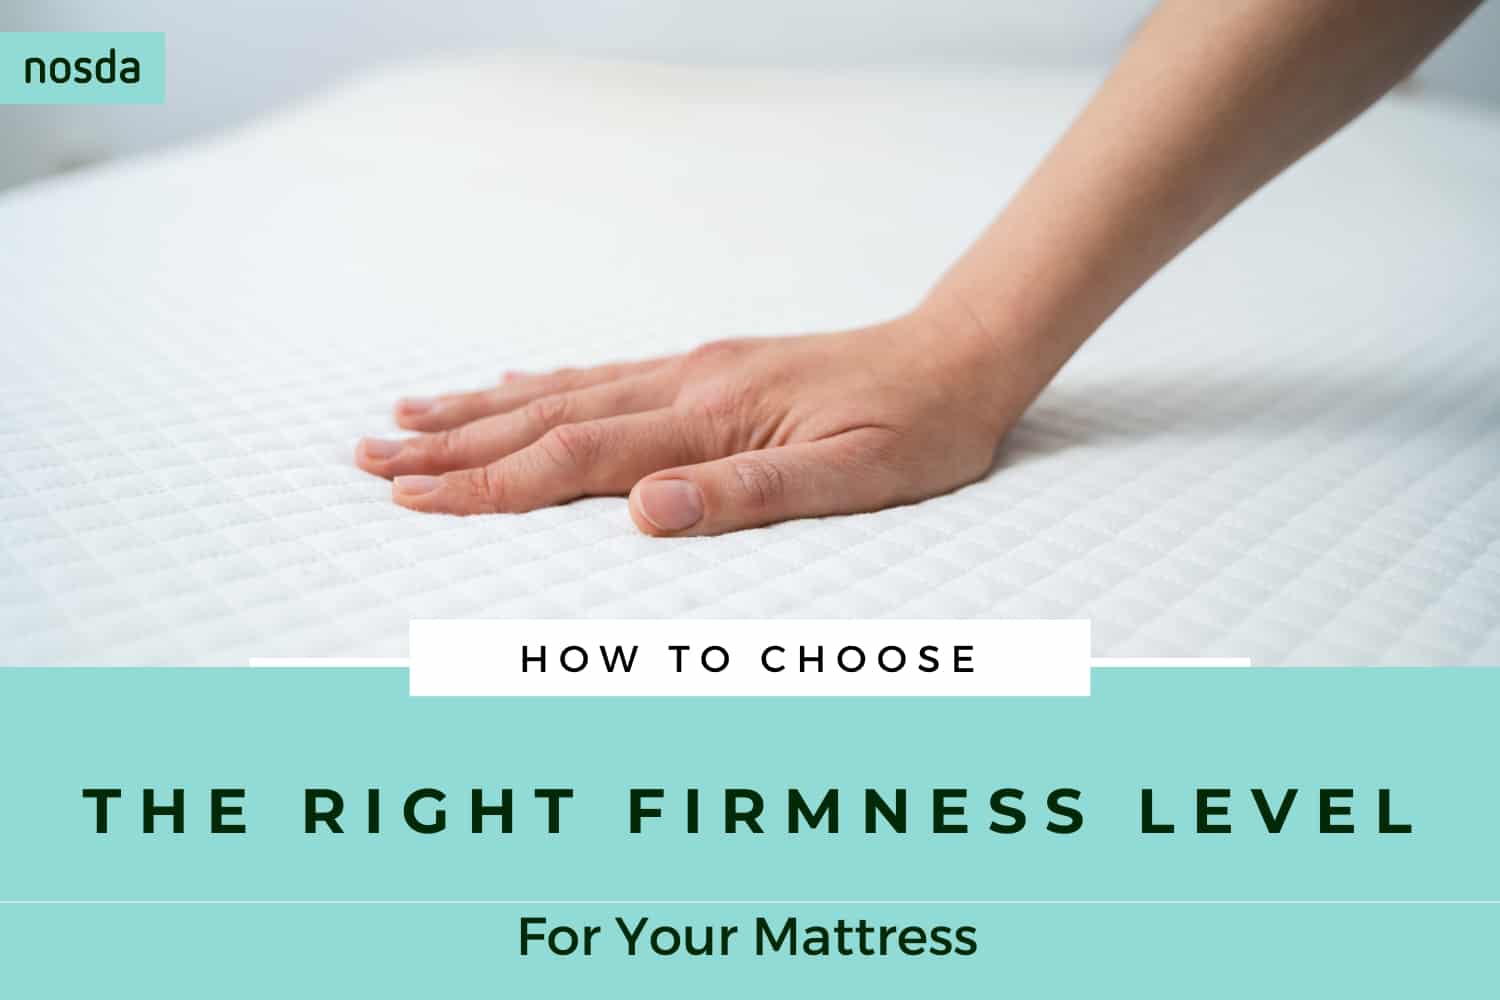 How To Choose The Right Firmness Level For Your Mattress